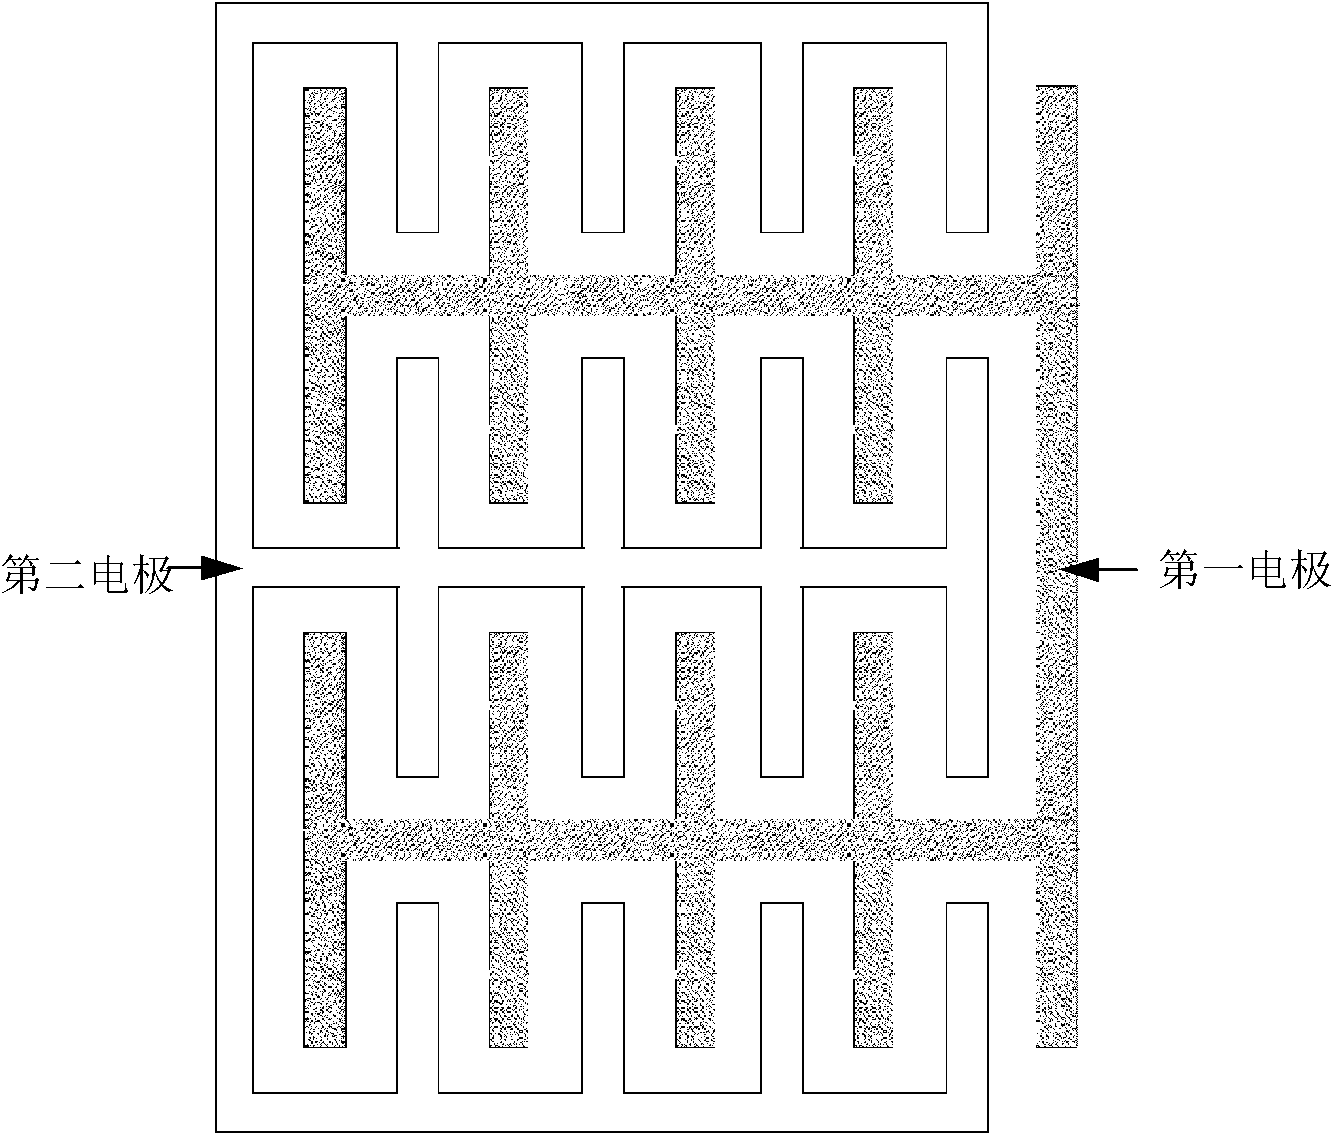 Metal-oxide-metal capacitor structure